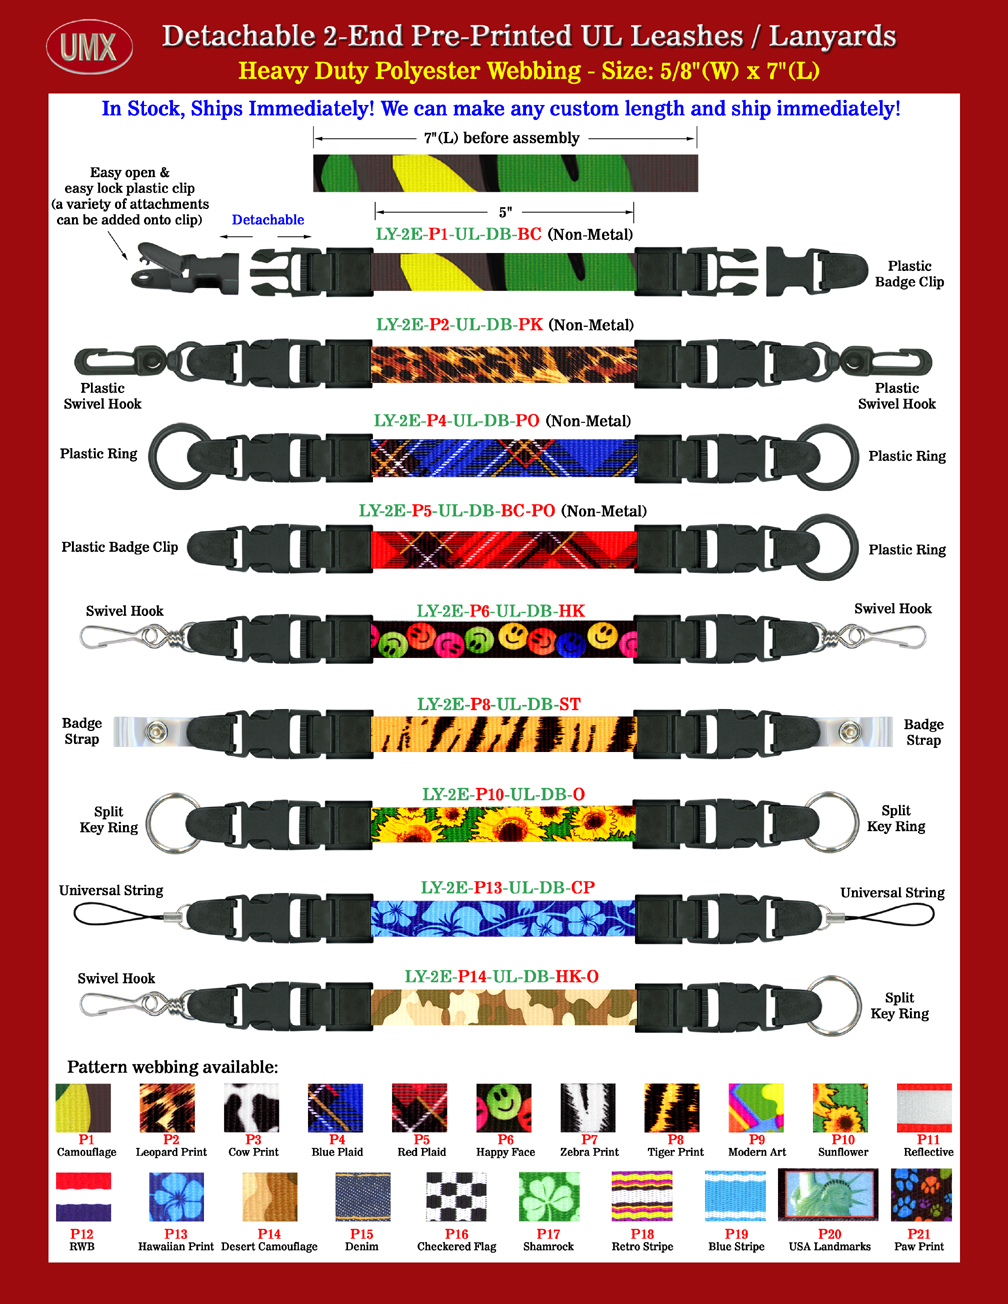 5/8" Universal Link Pre-Printed 2-End Quick Release Leash Lanyards - With More Than 20 Themes In Stock